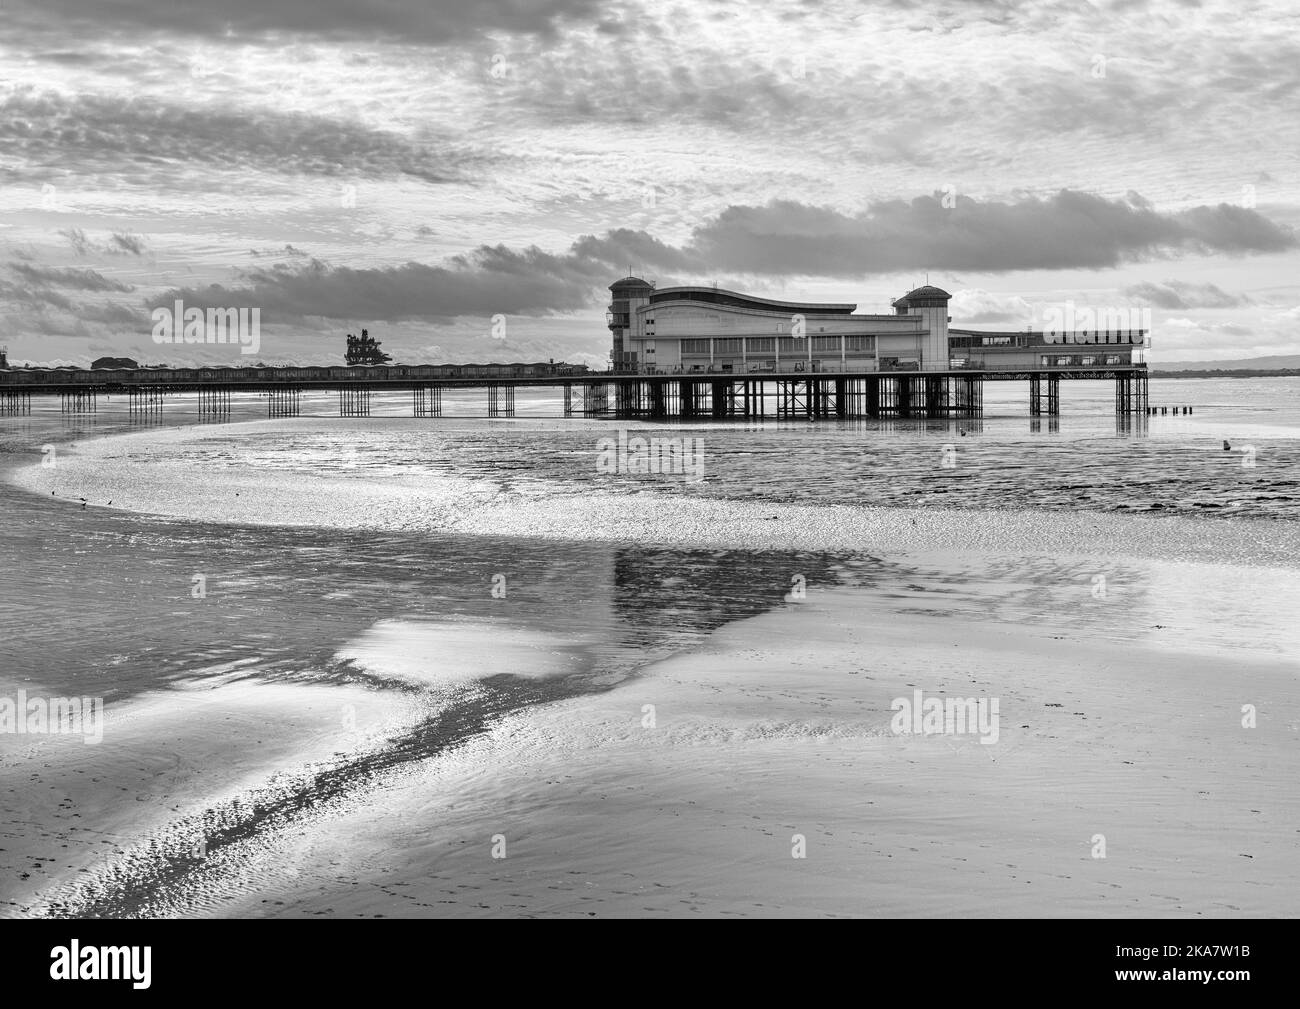 Grand Pier at Weston Super Mare, Somerset UK in October Stock Photo